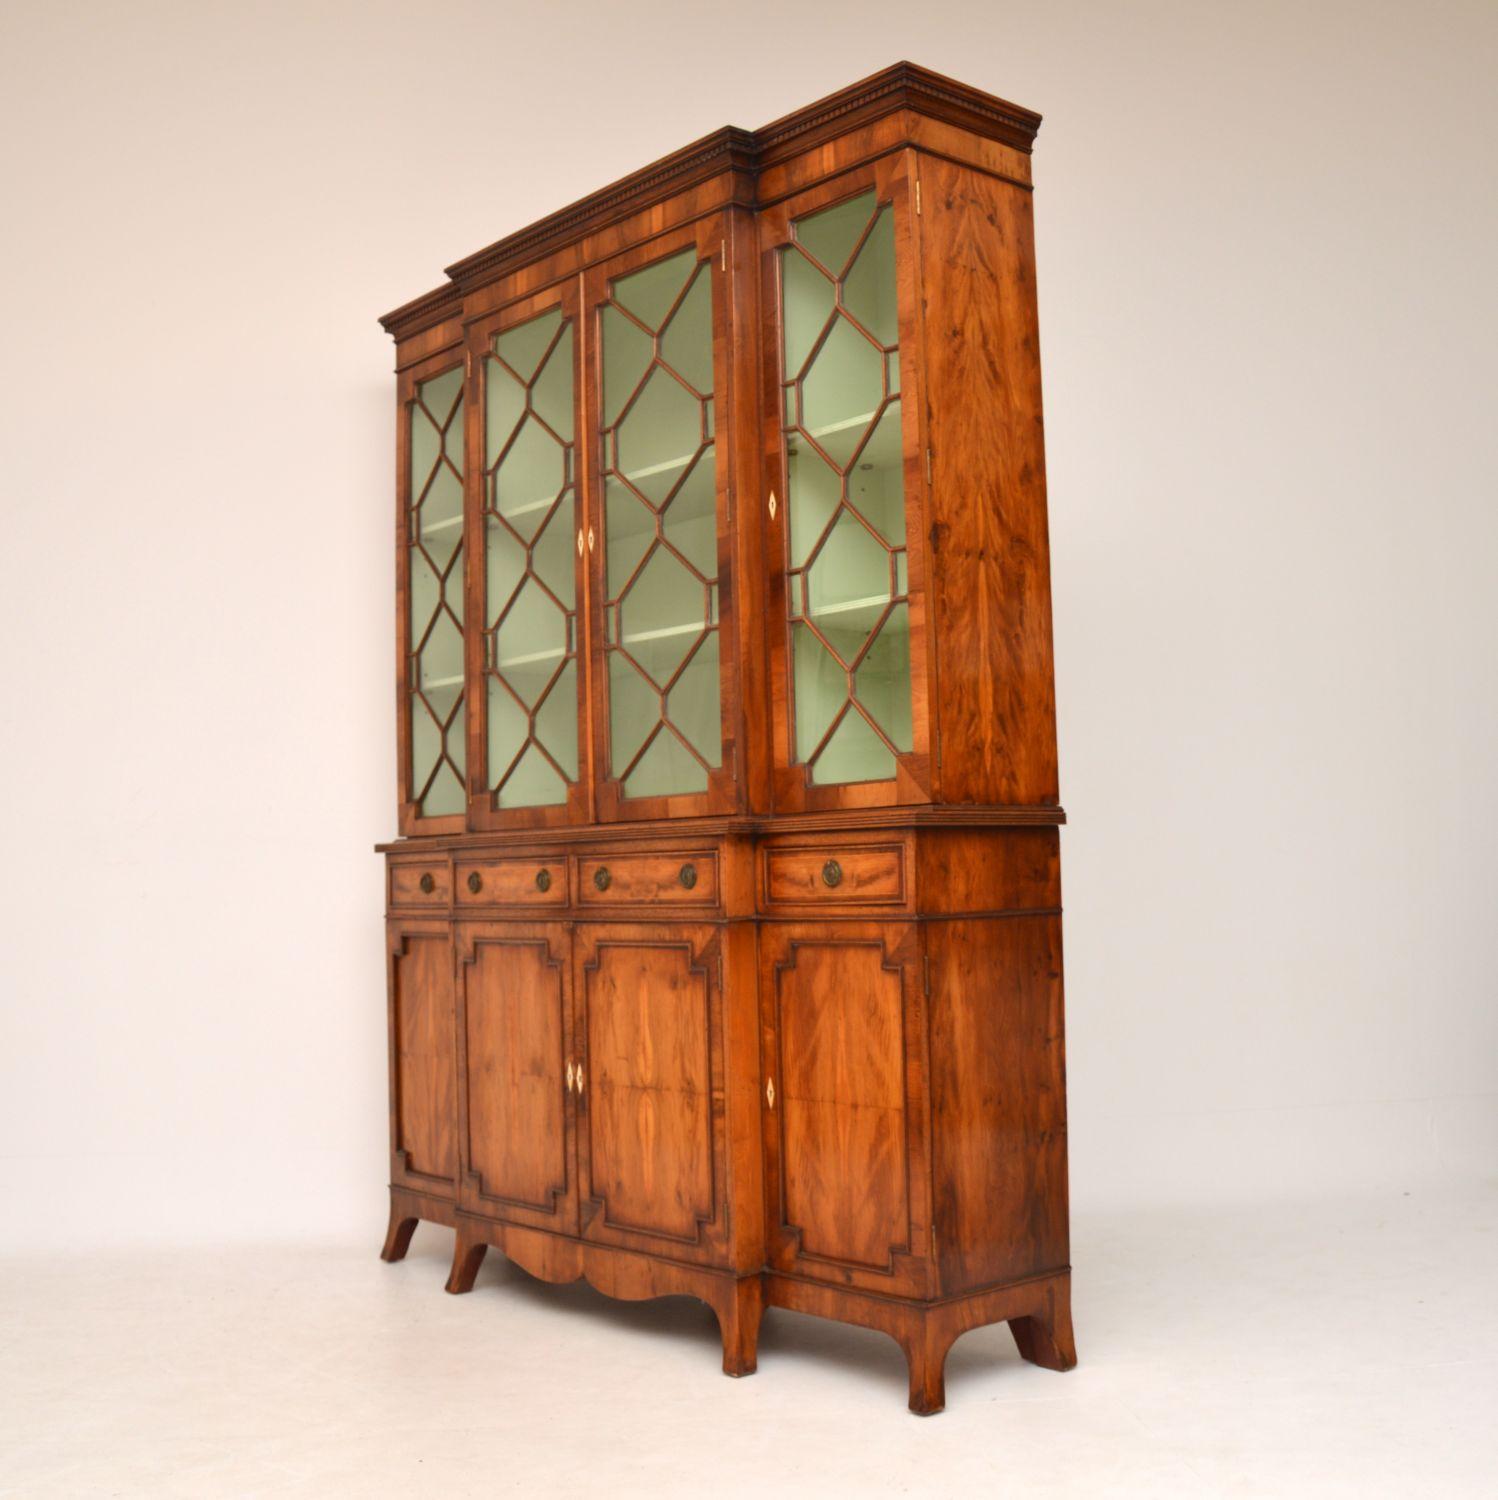 Fine quality antique Regency style Yew wood breakfront bookcase in excellent condition & with many lovely features. This bookcase is not too large, so would fit in modern homes too.

It has a dental moulding below the cornice, four astral-glazed